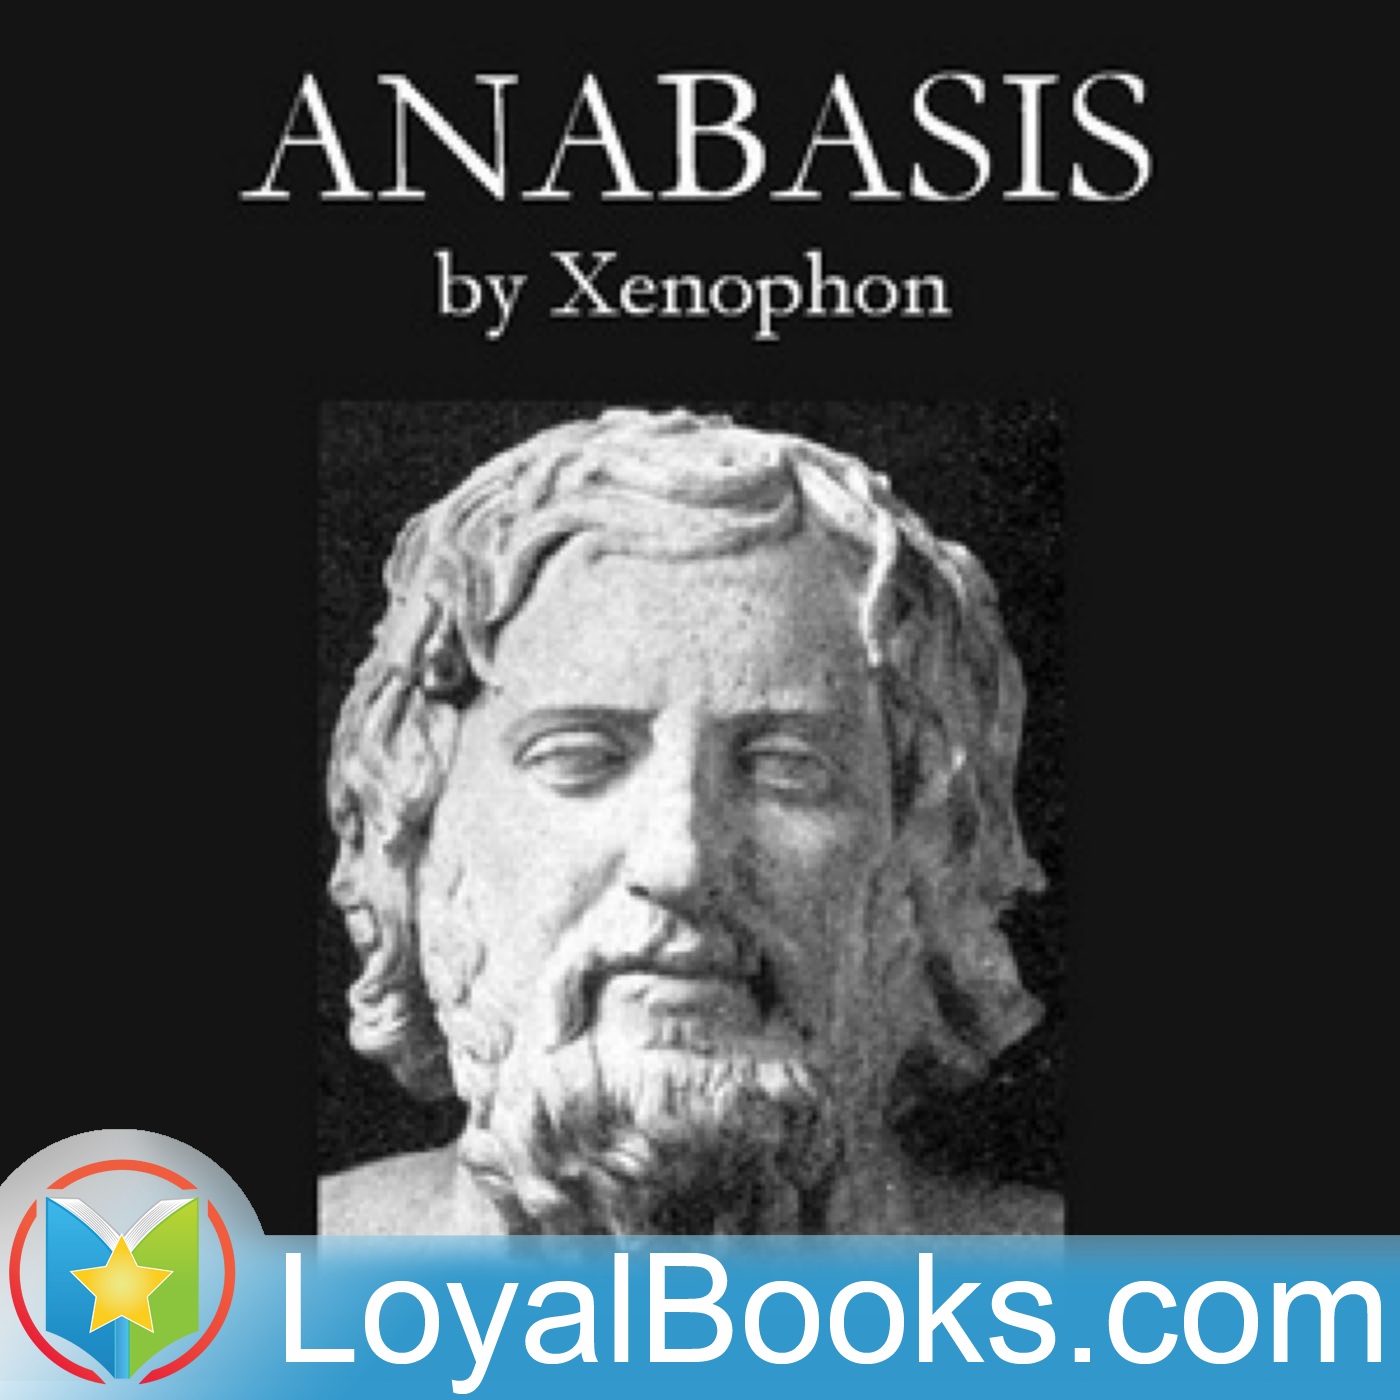 Xenophon's Anabasis by Xenophon